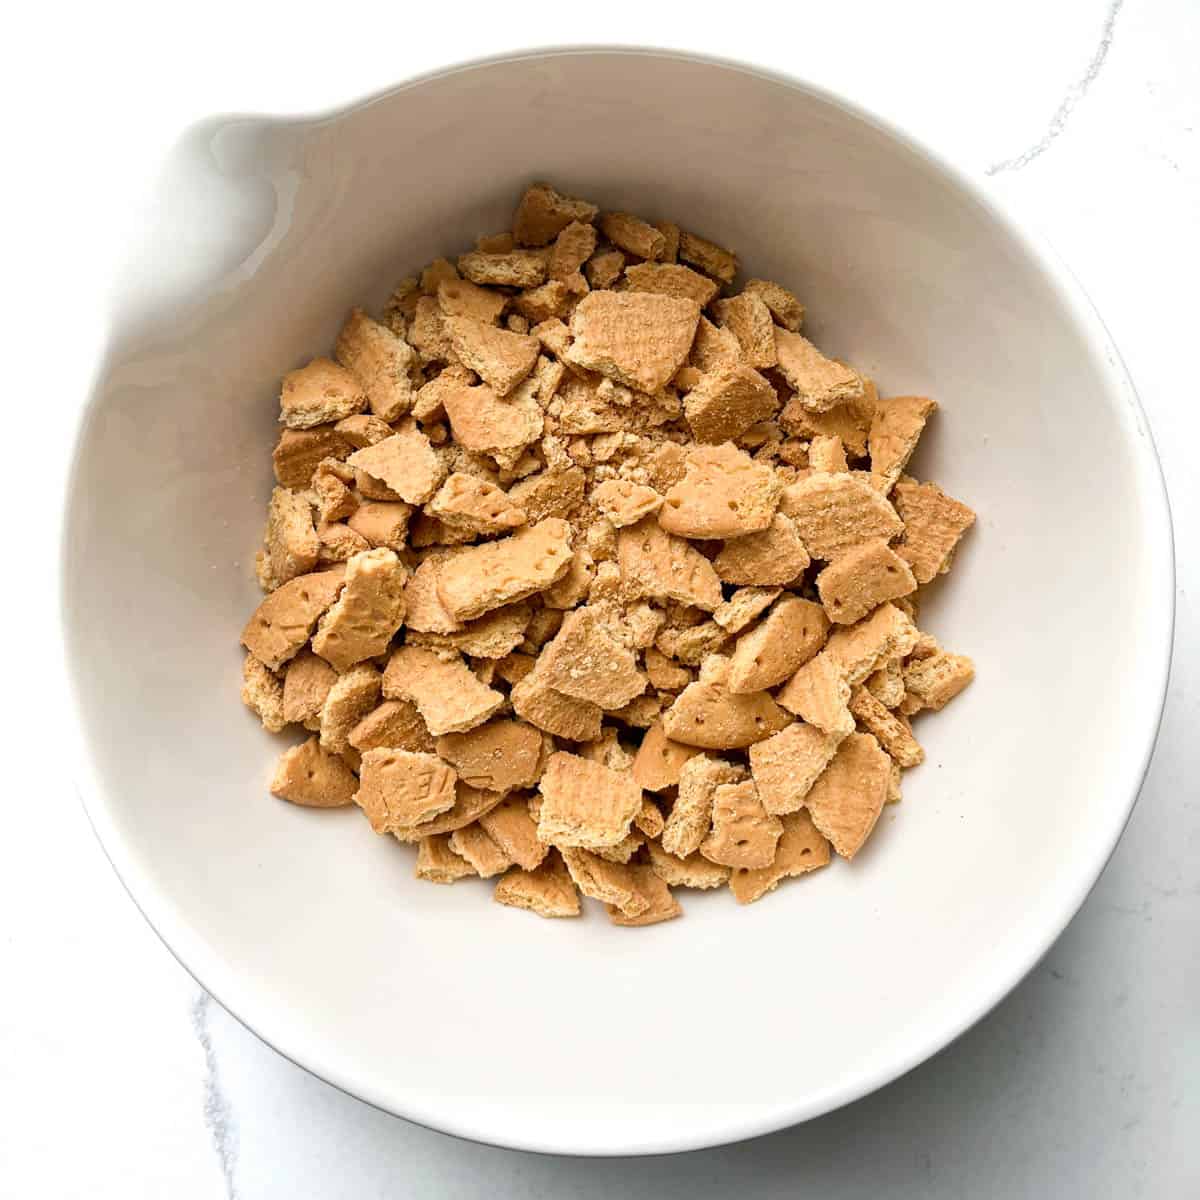 Crushed biscuits in a large white bowl.